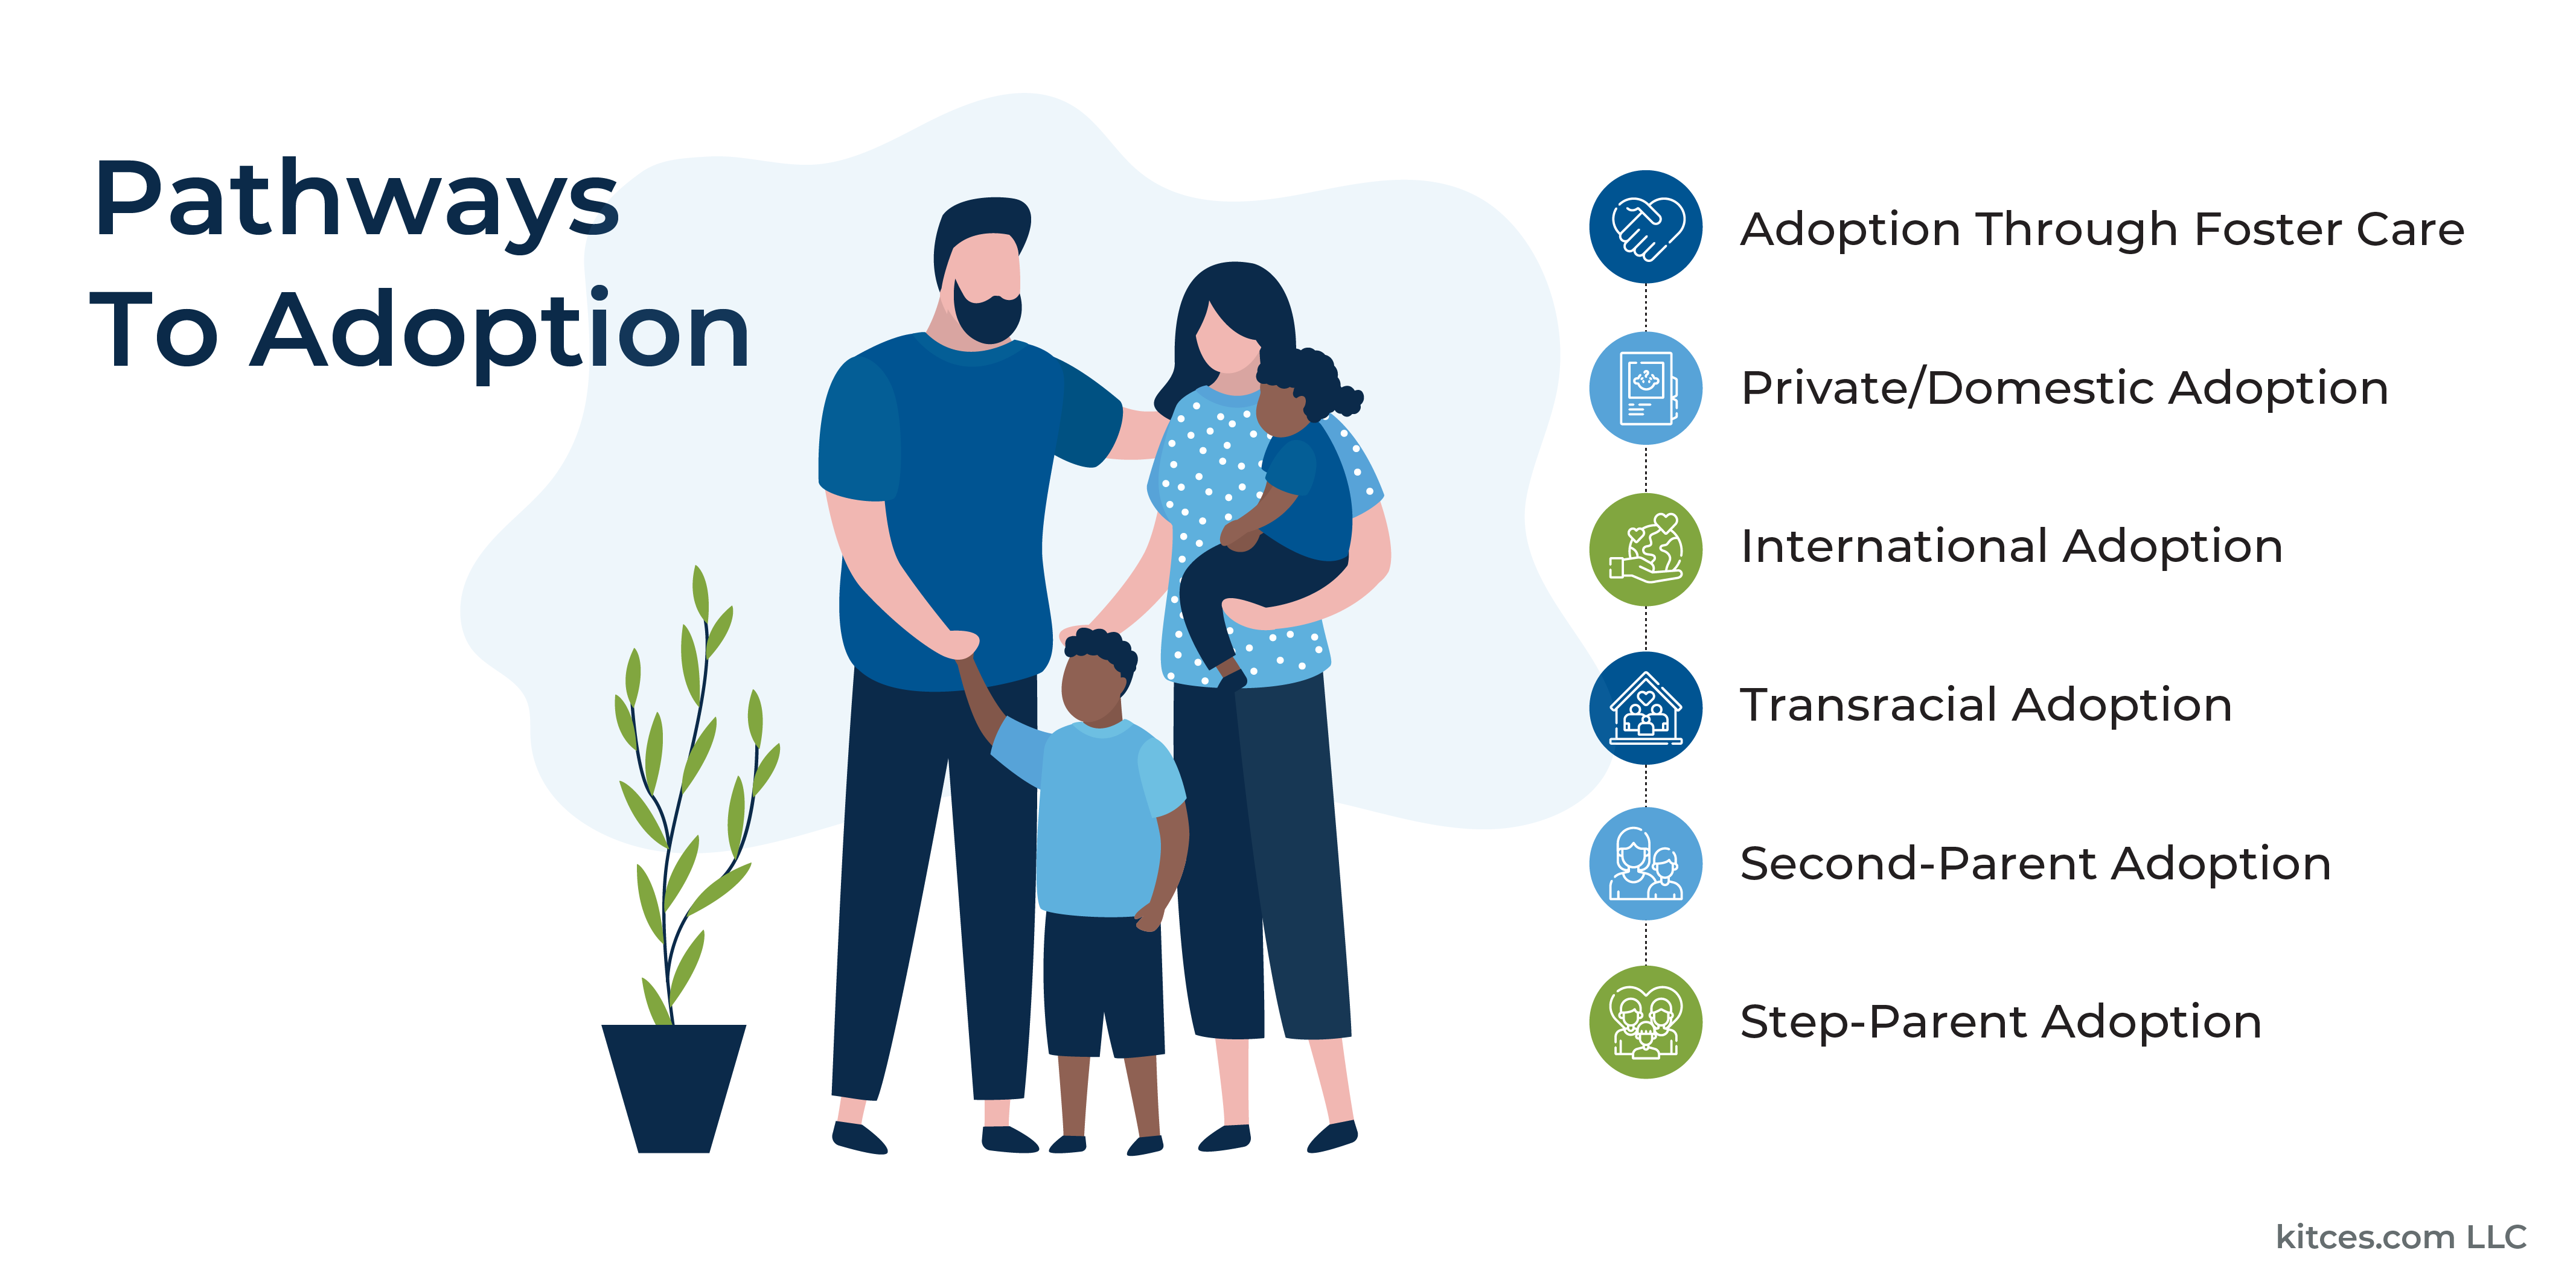 Planning For Adoption: Understanding Completely different Pathways And Their Prices, Tax Breaks, And Monetary Help Accessible